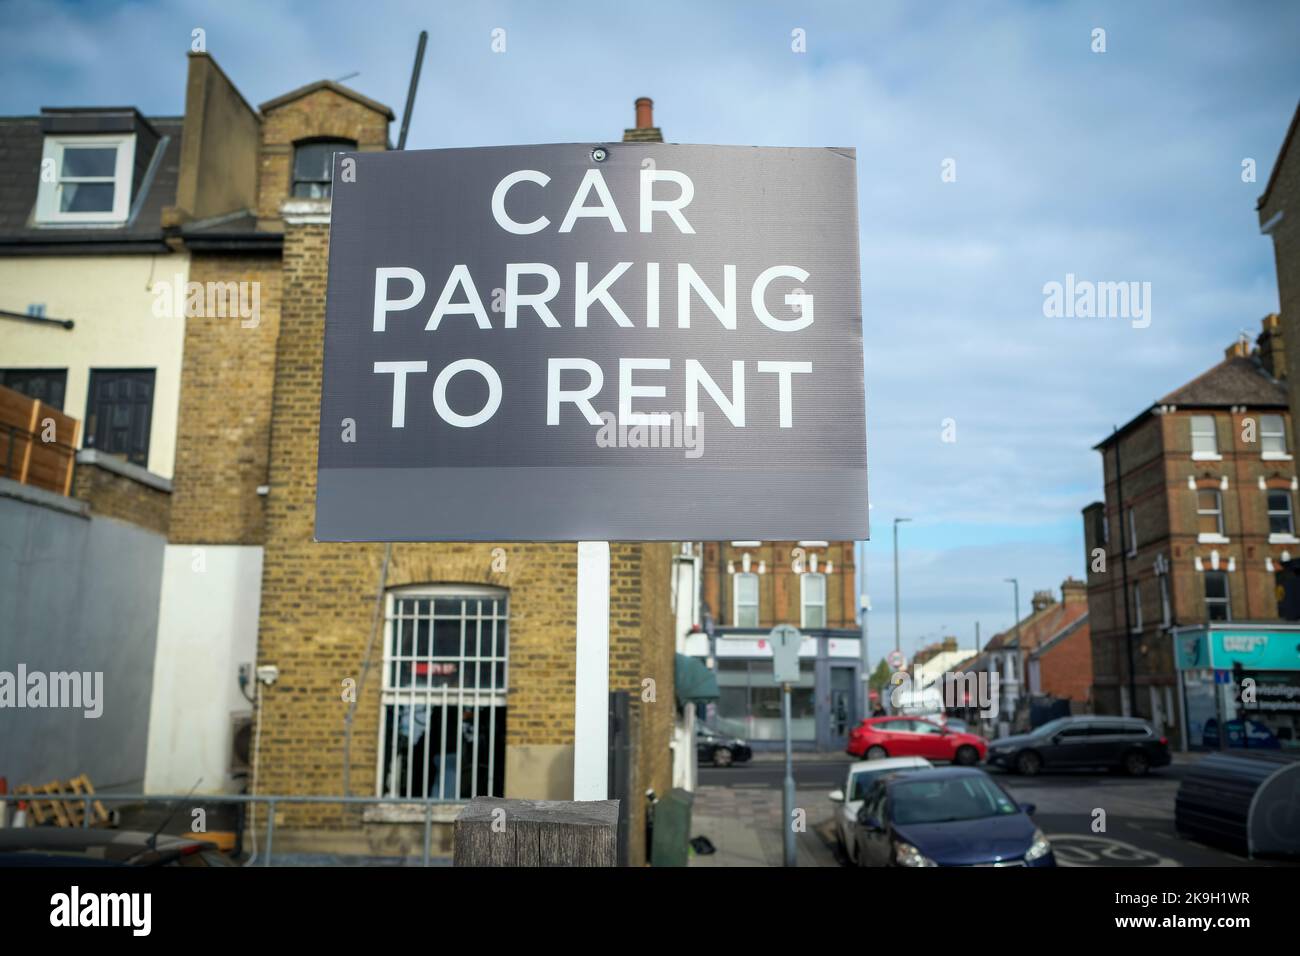 Car Parking to Rent sign on urban street Stock Photo